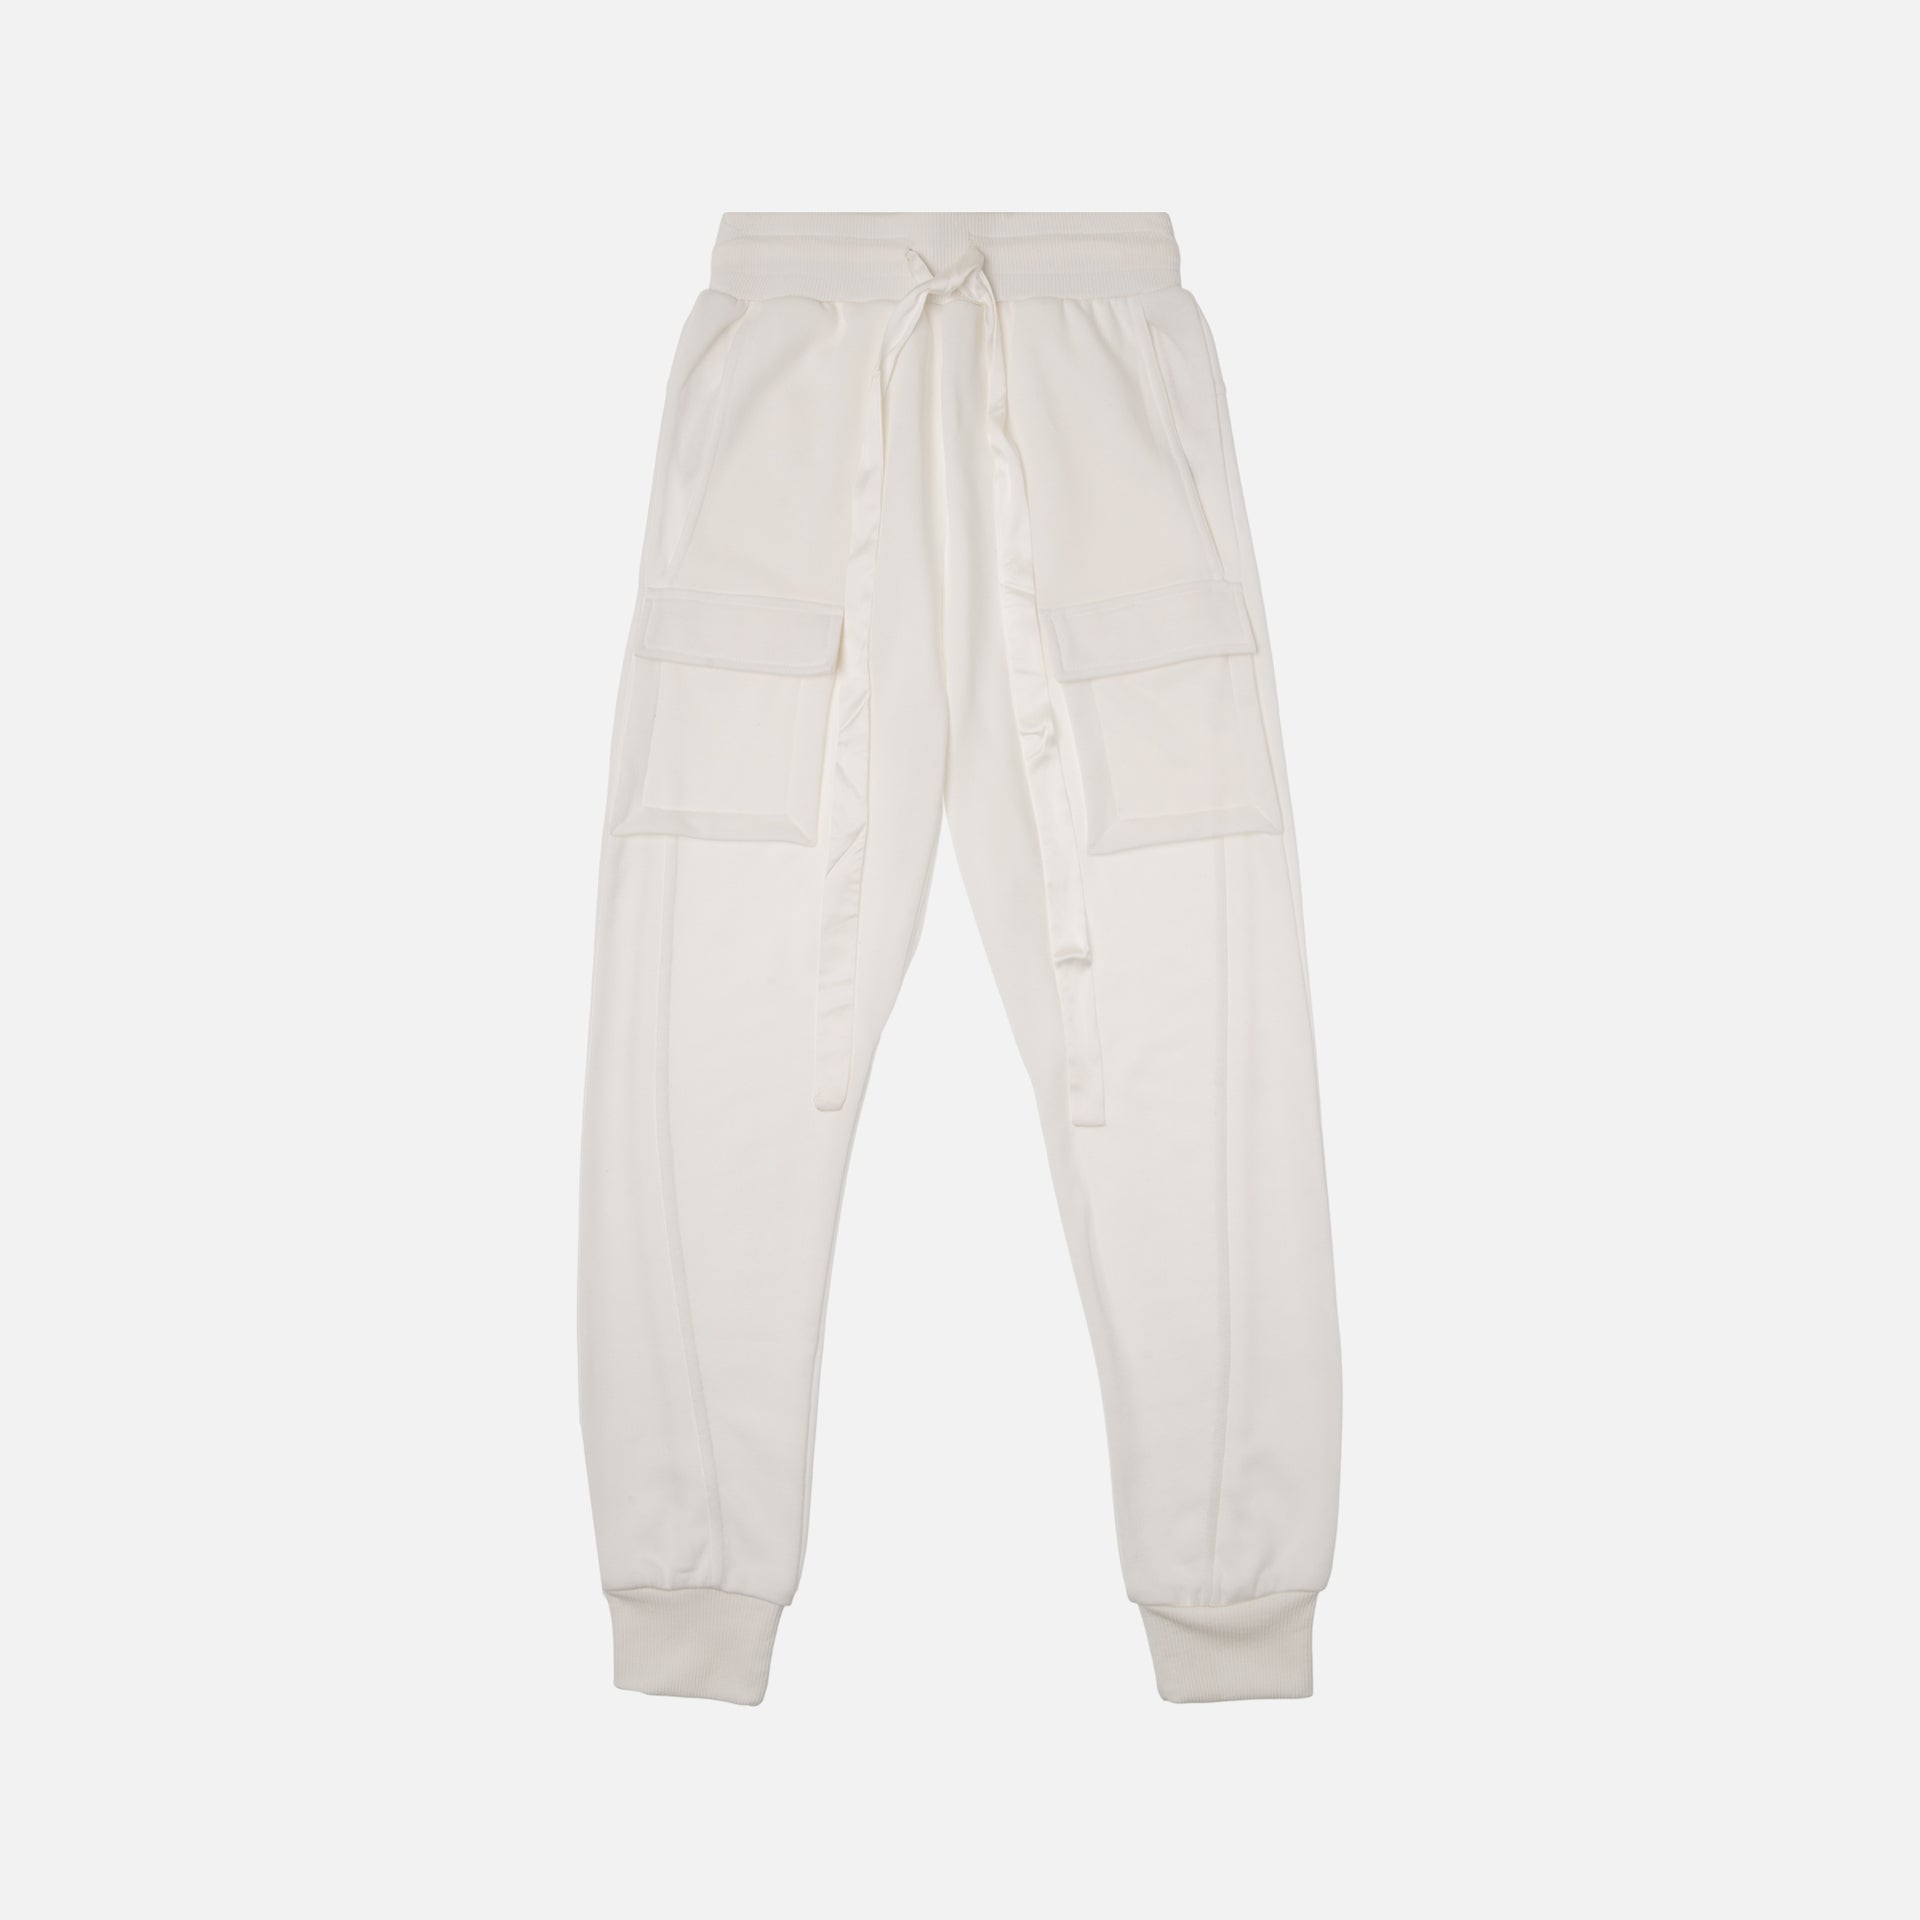 Manning Cartell Just for Kicks Cargo Pant - White